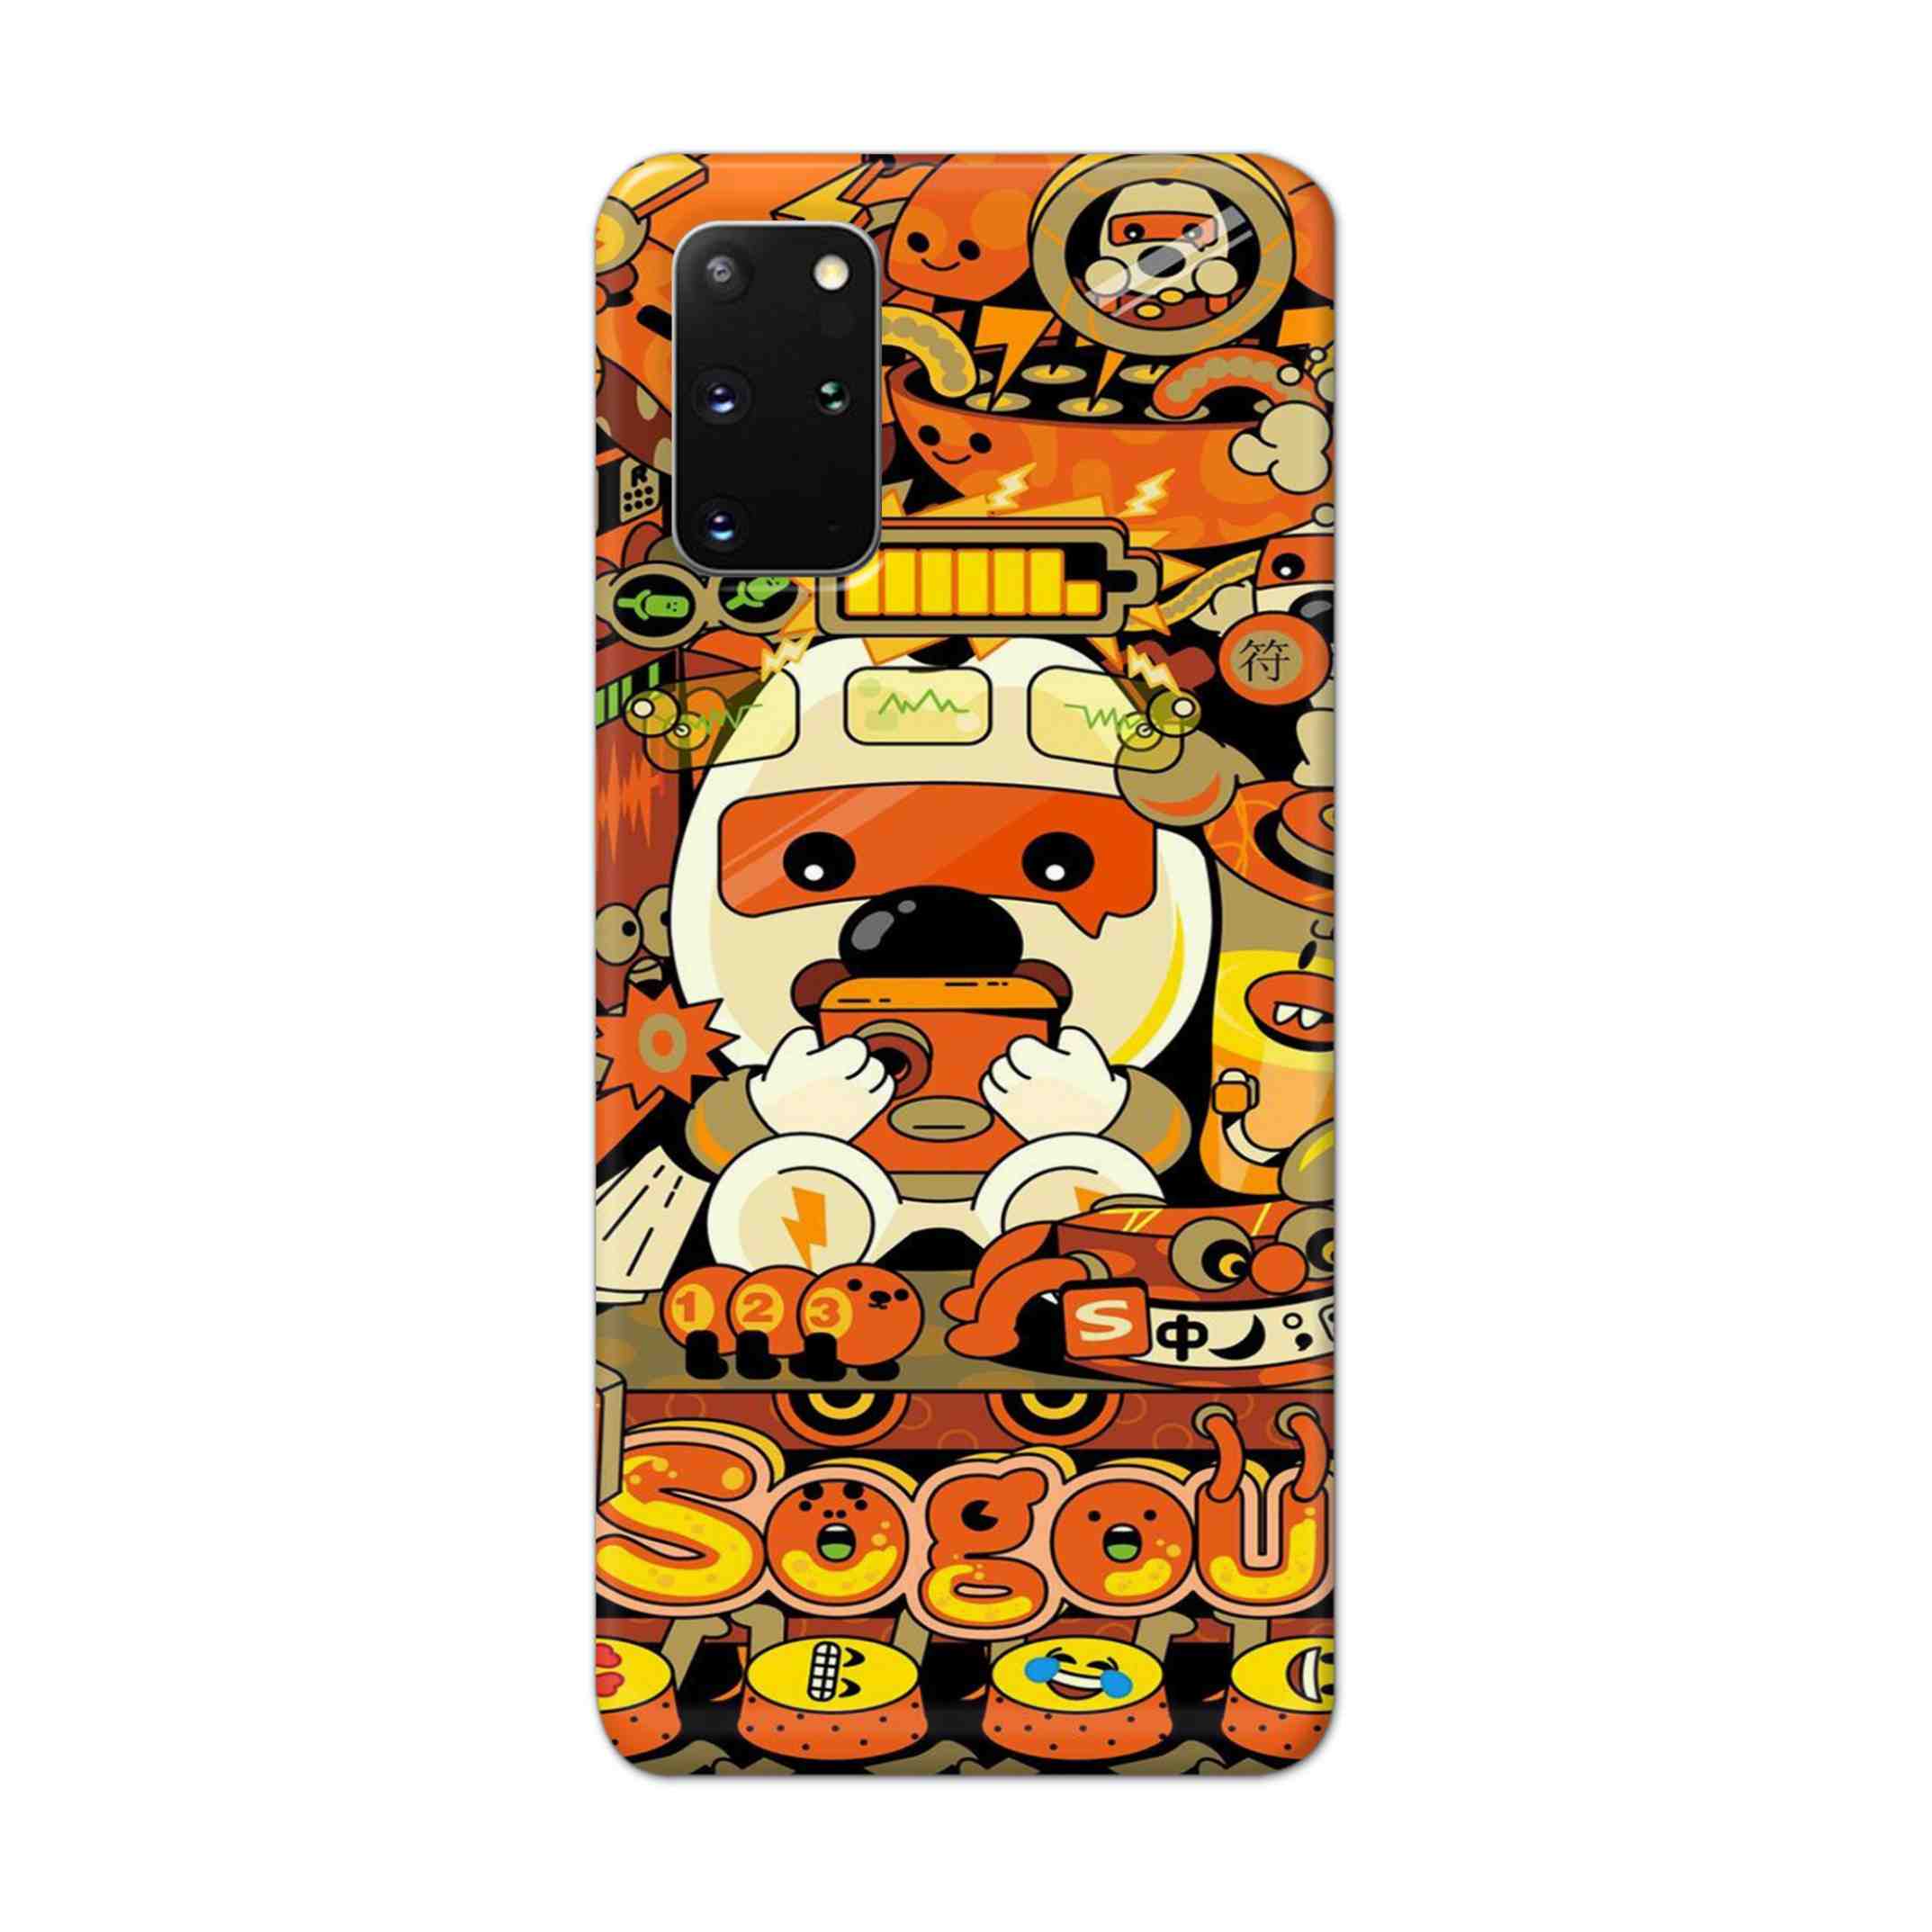 Buy Sogou Hard Back Mobile Phone Case Cover For Samsung Galaxy S20 Plus Online